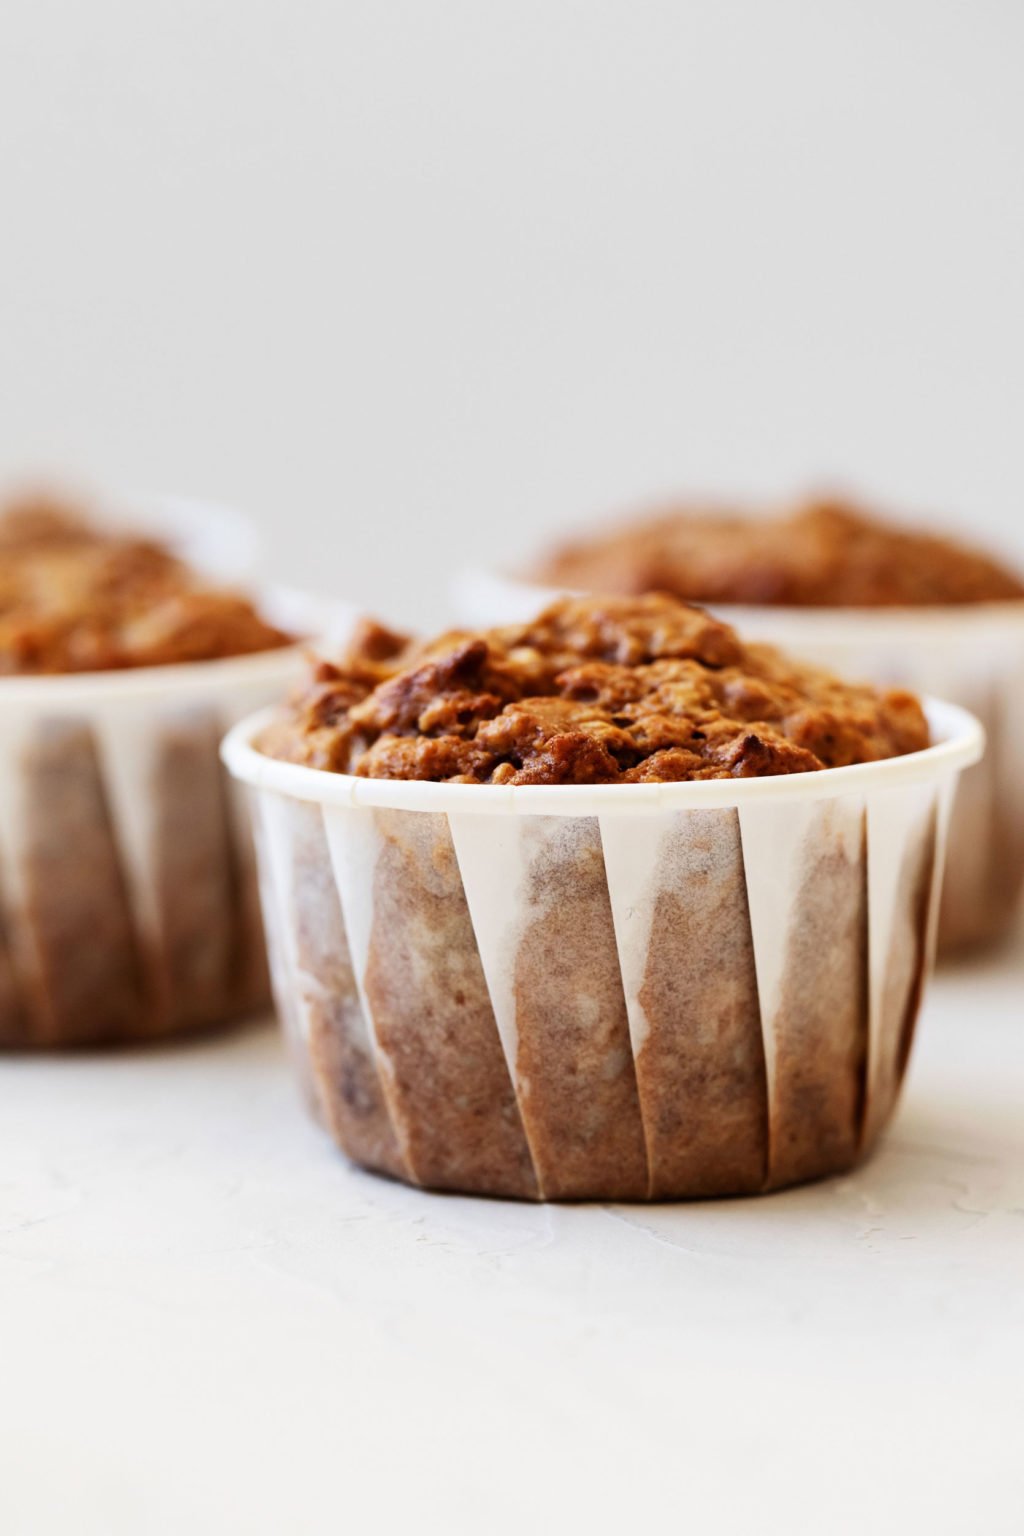 An angled photograph of vegan apple bran muffins, each wrapped in a white liner, resting on a white surface.